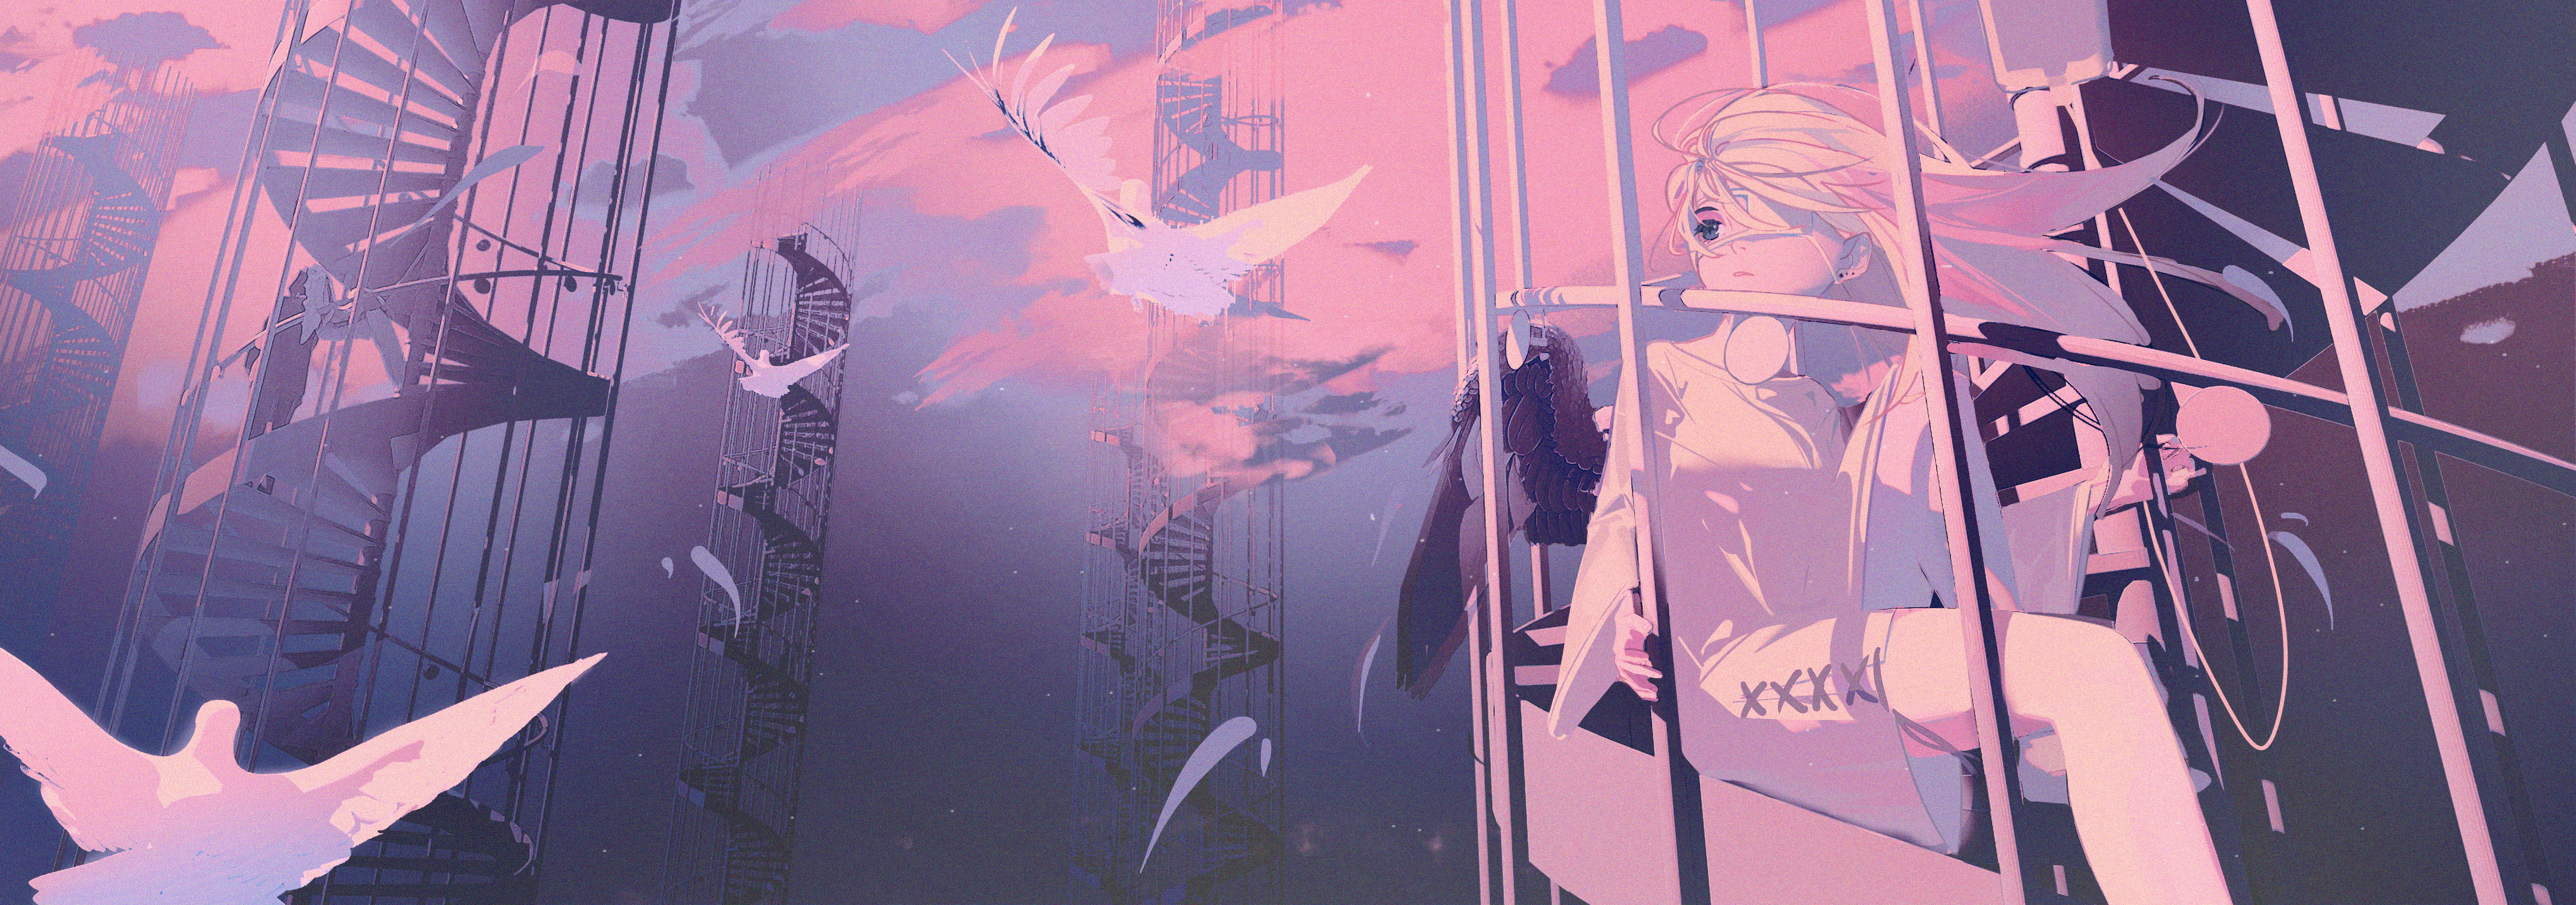 General 6000x2109 anime anime girls women fantasy art sitting hair in face eyepatches stairs windy birds animals sky